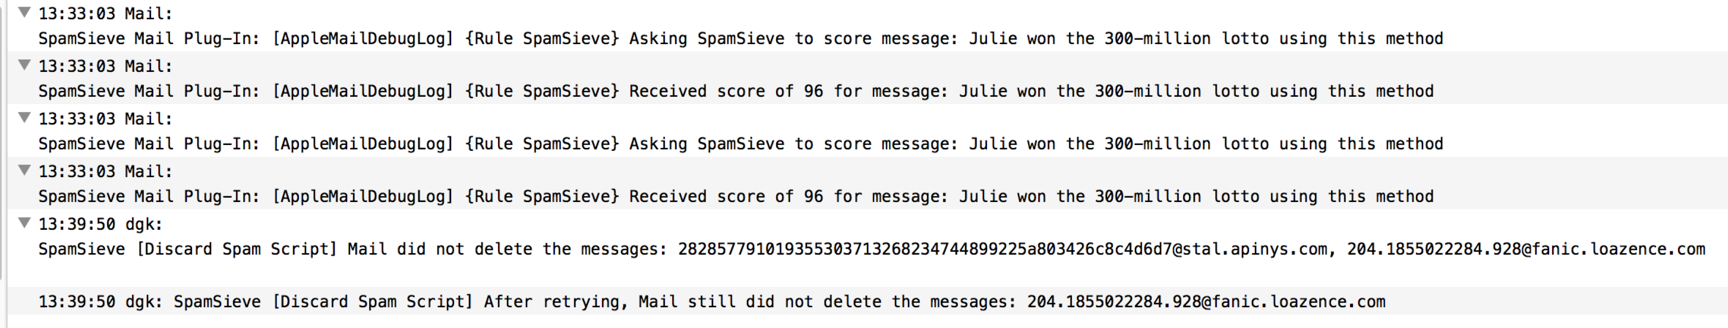 Duplicate SPAM; both moved; one not deleted by script.png